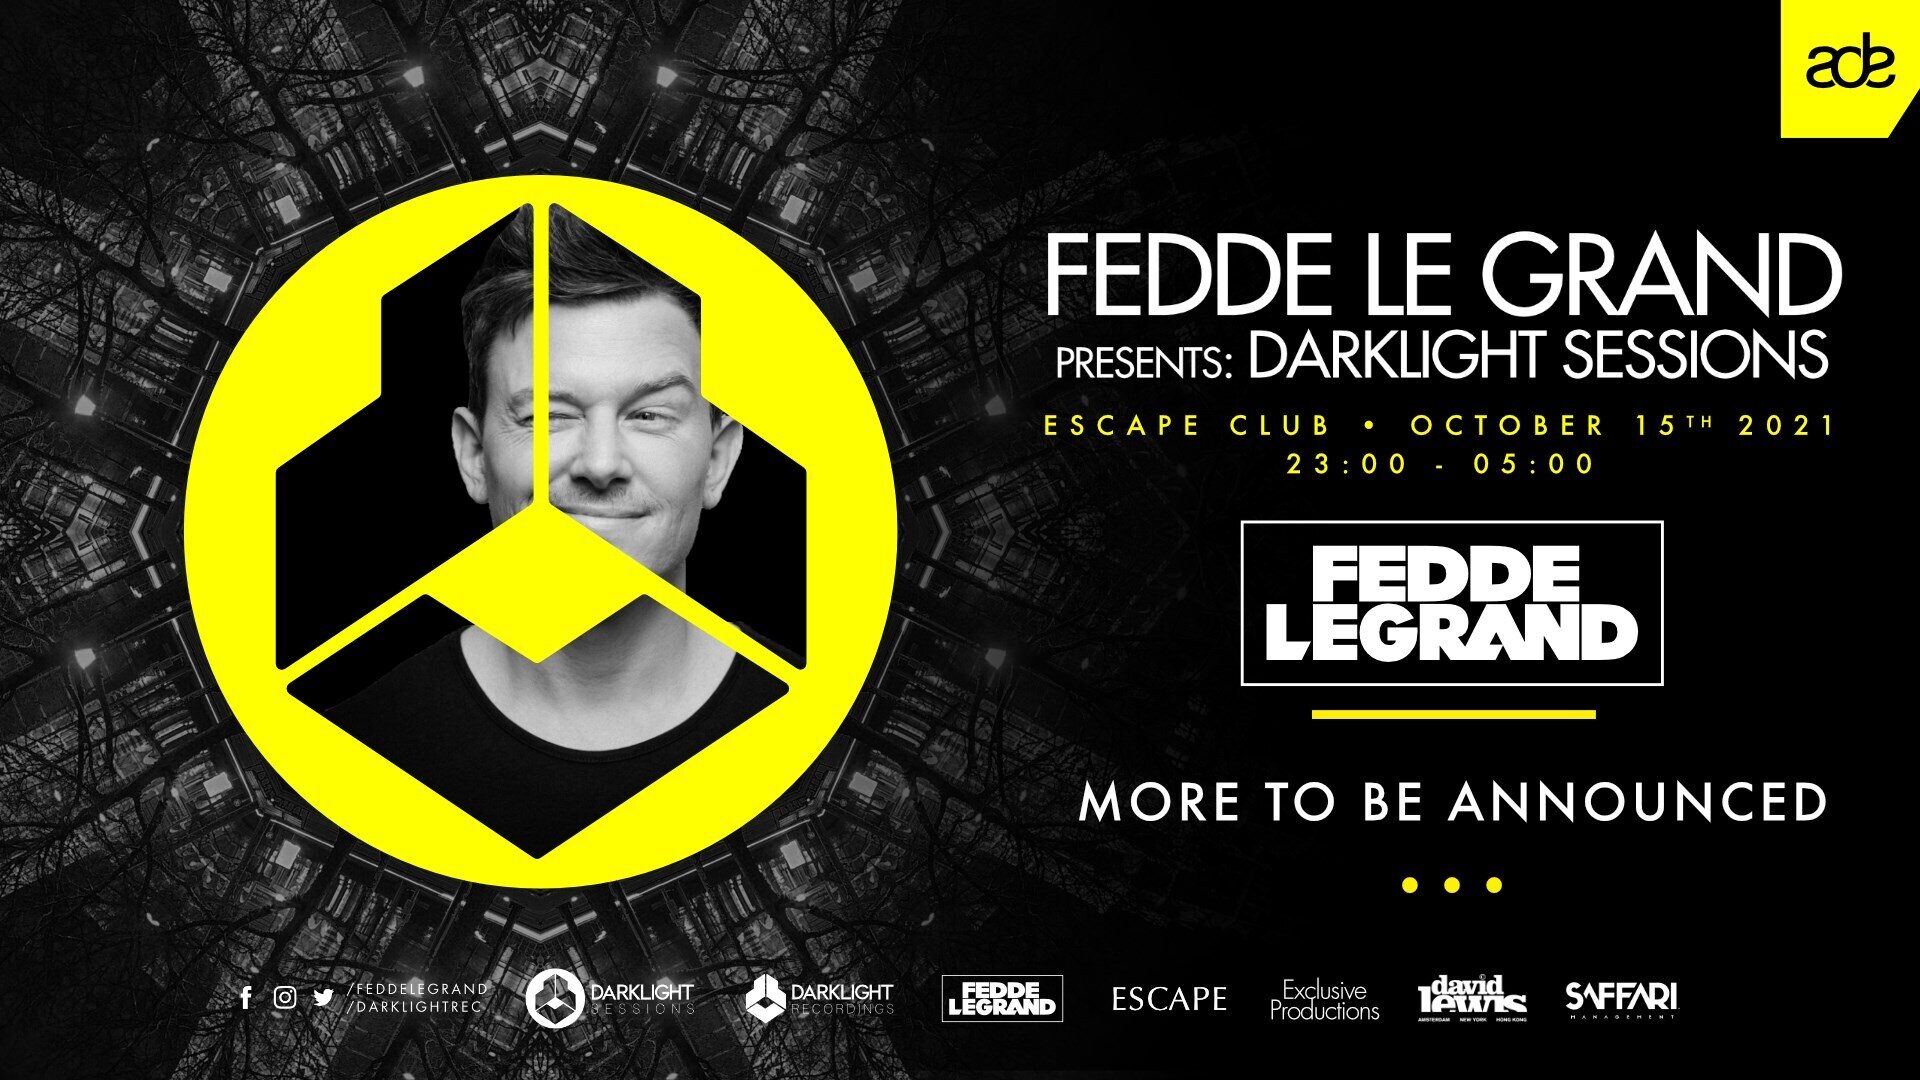 Fedde Le Grand Wallpapers